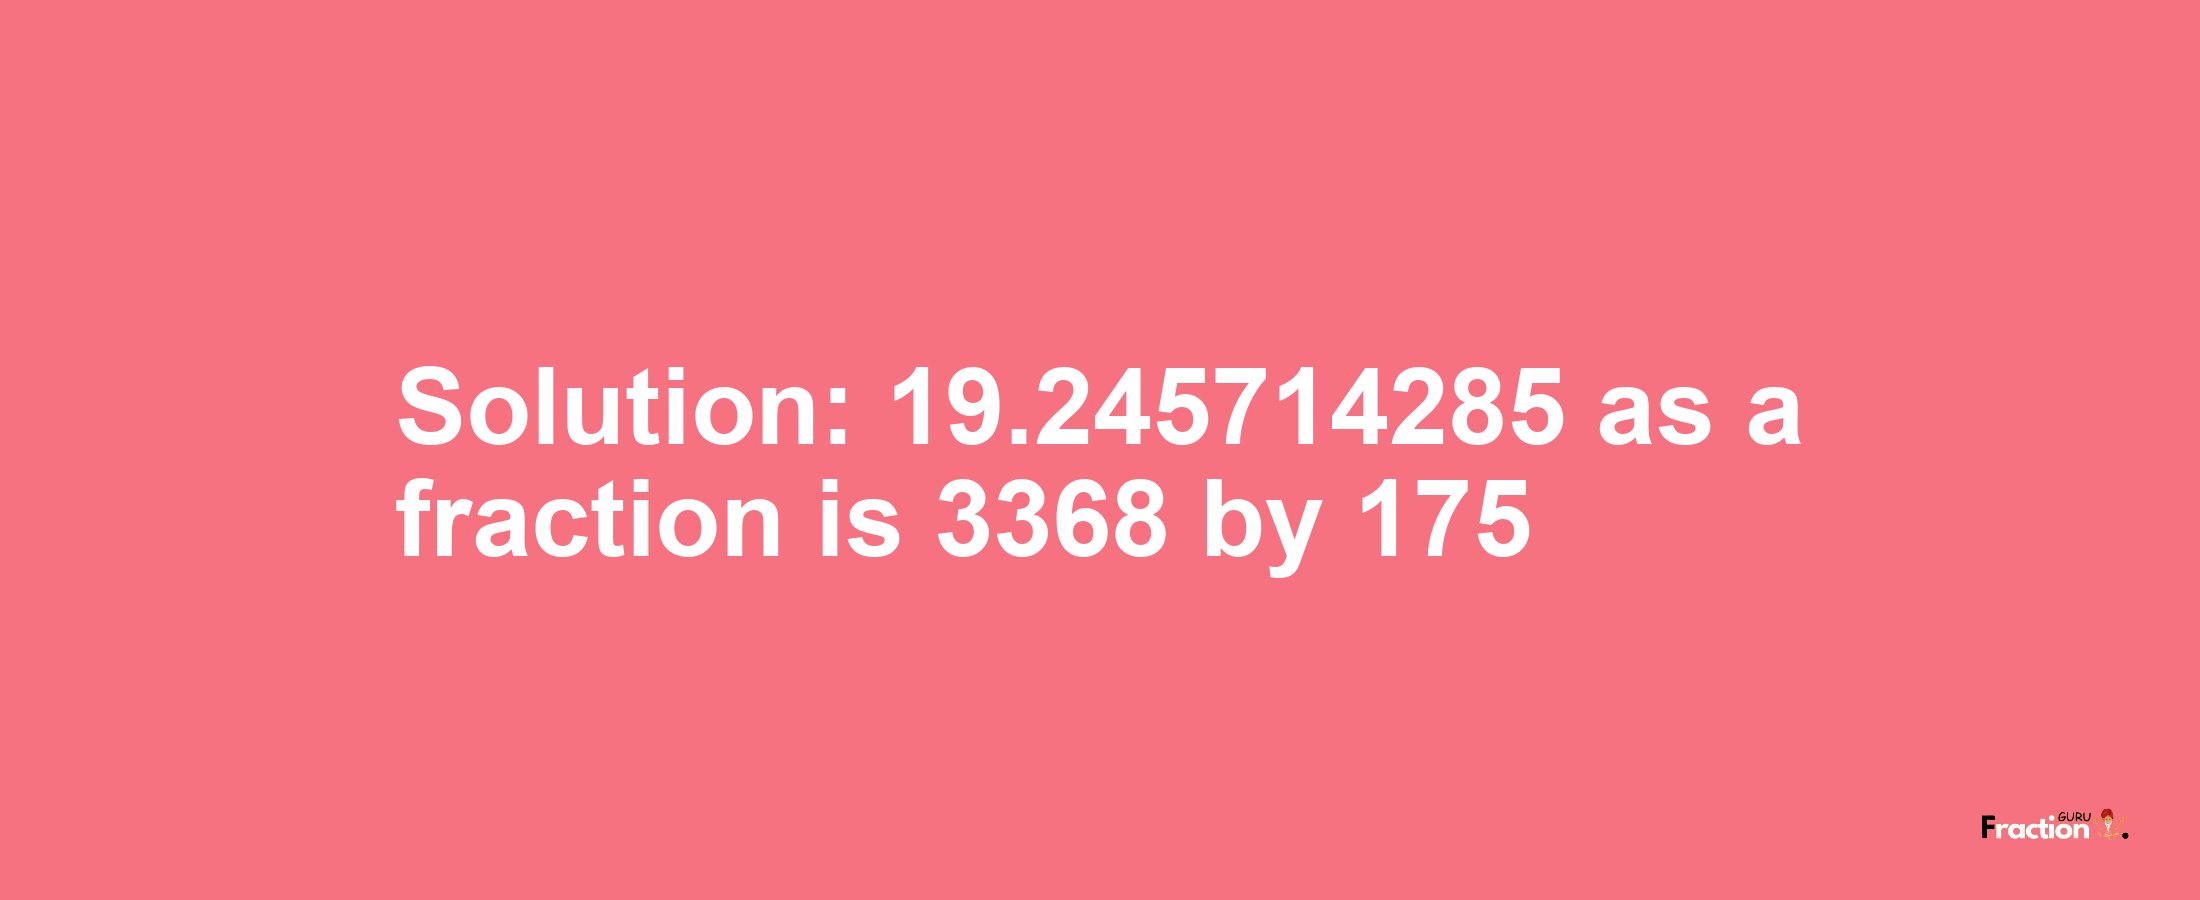 Solution:19.245714285 as a fraction is 3368/175